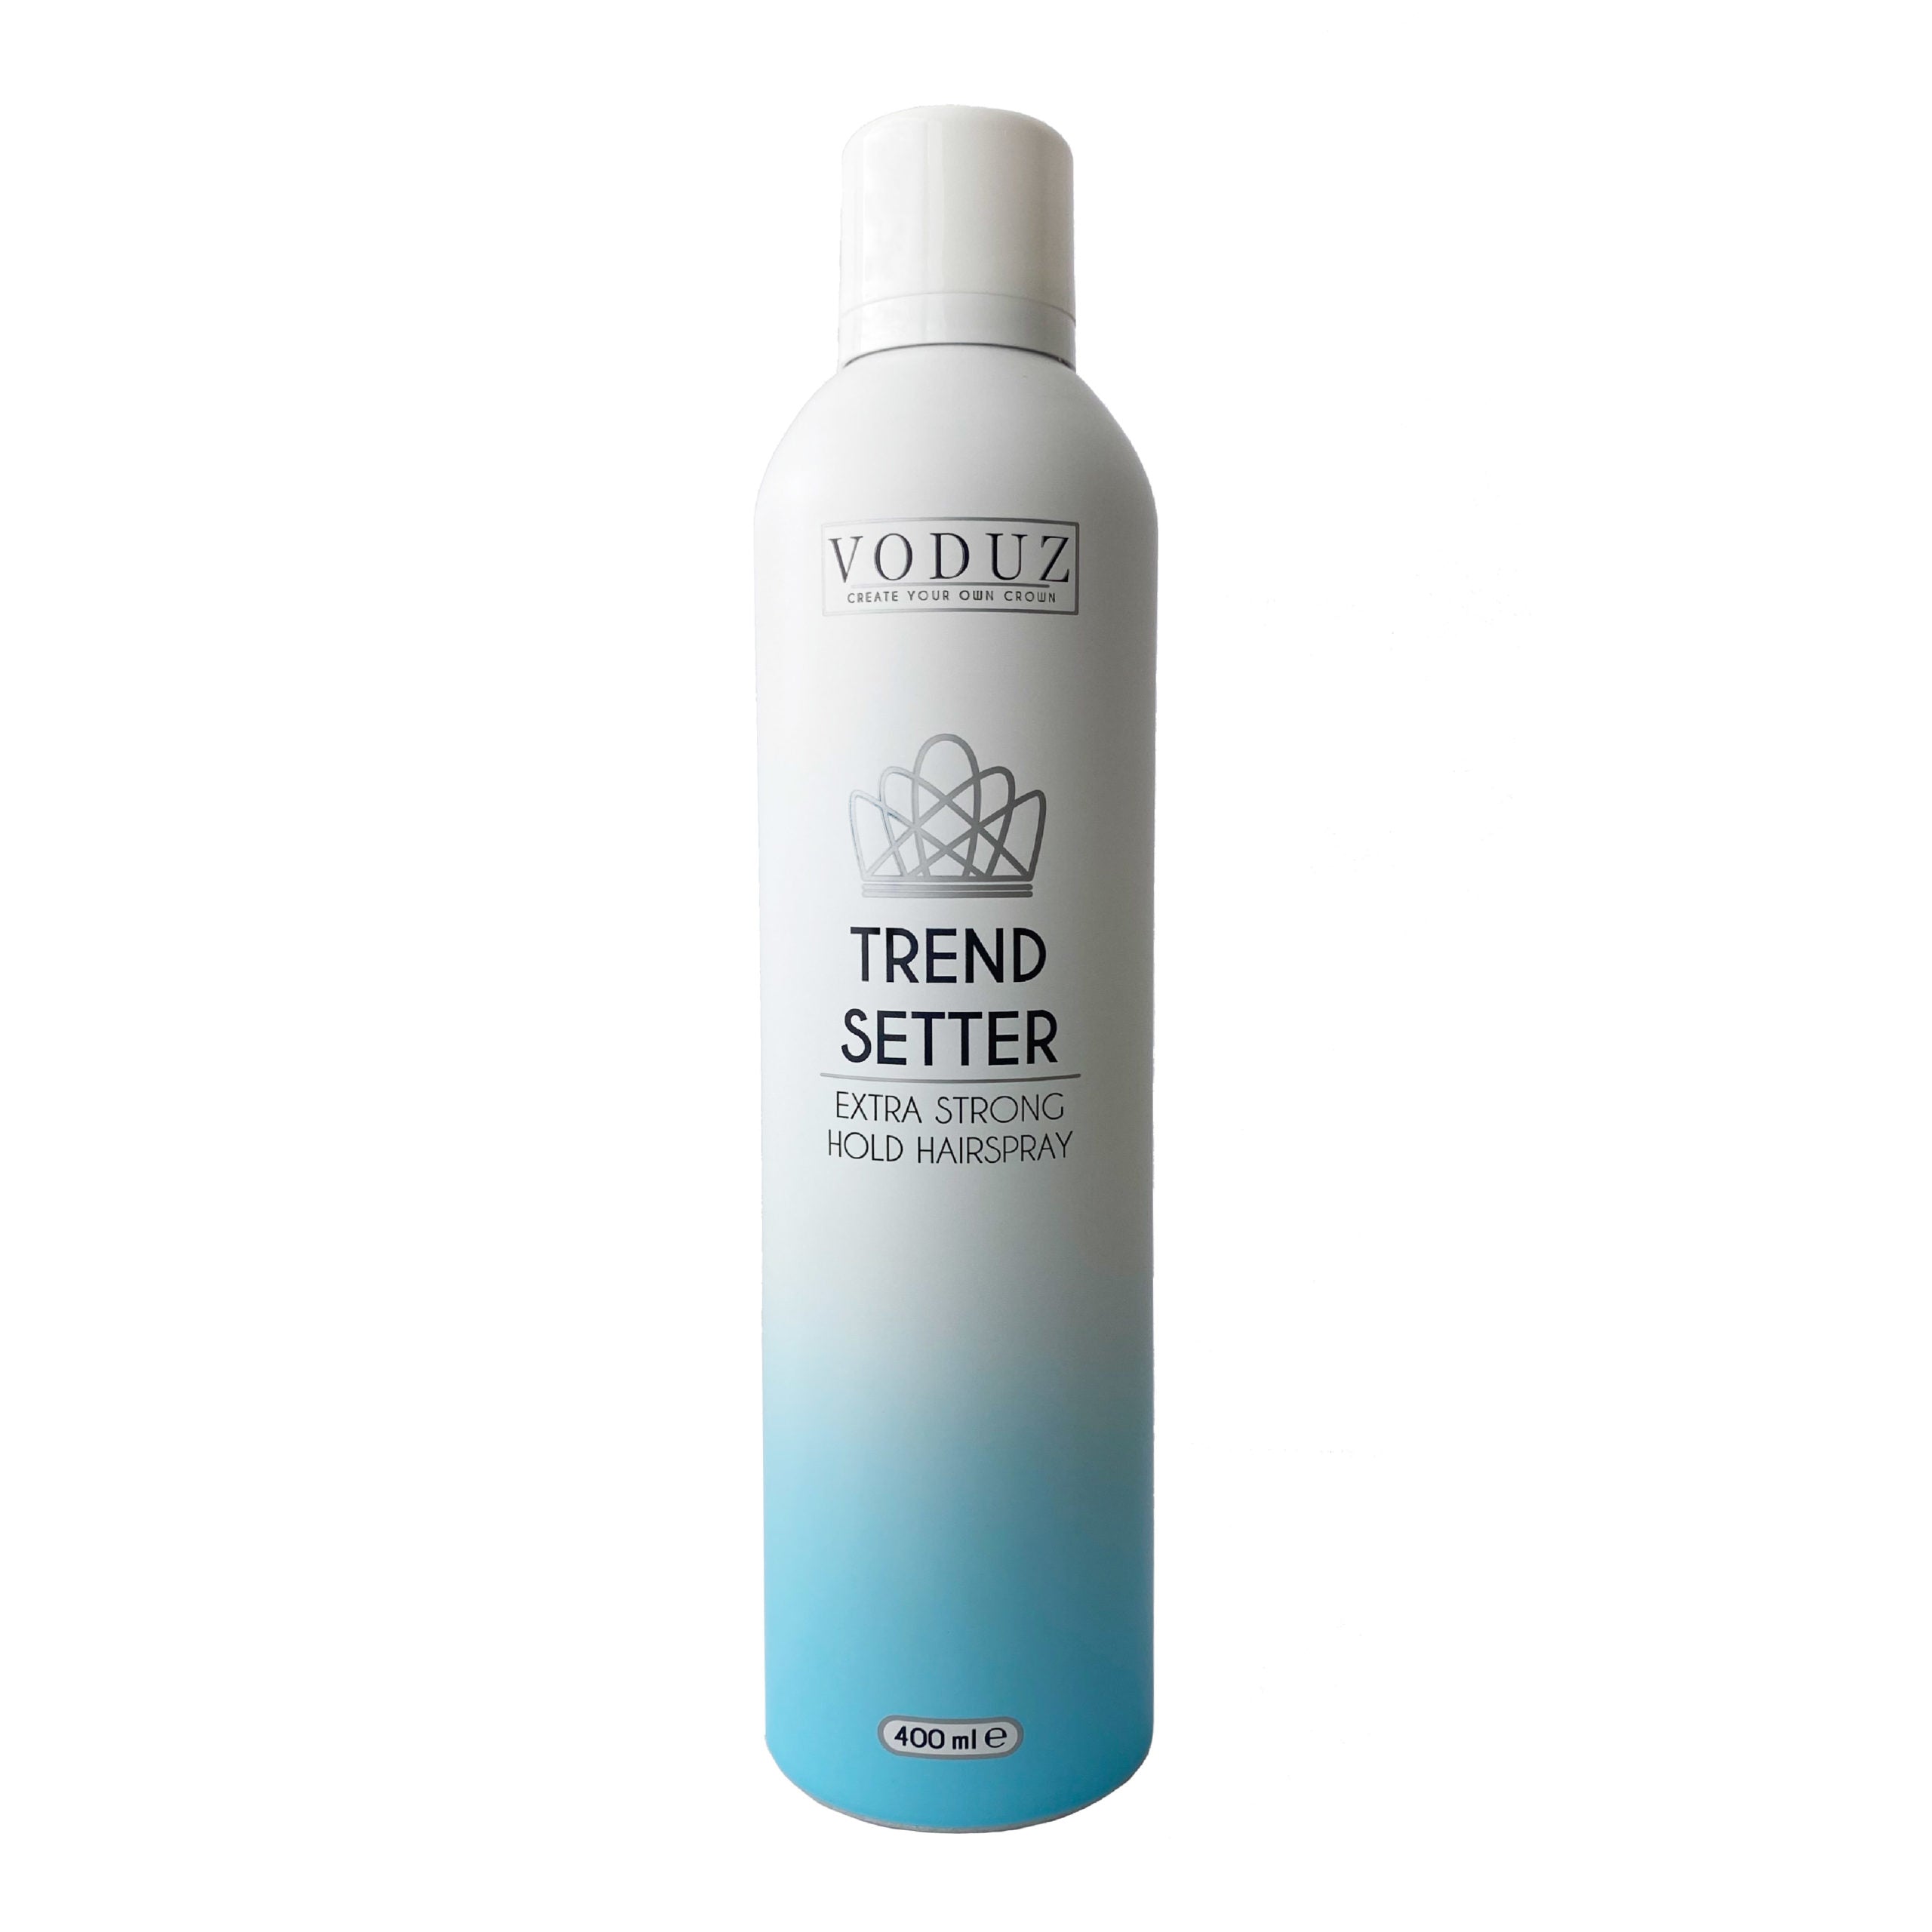 VODUZ Trend Setter - Extra Strong Hold Hairspray